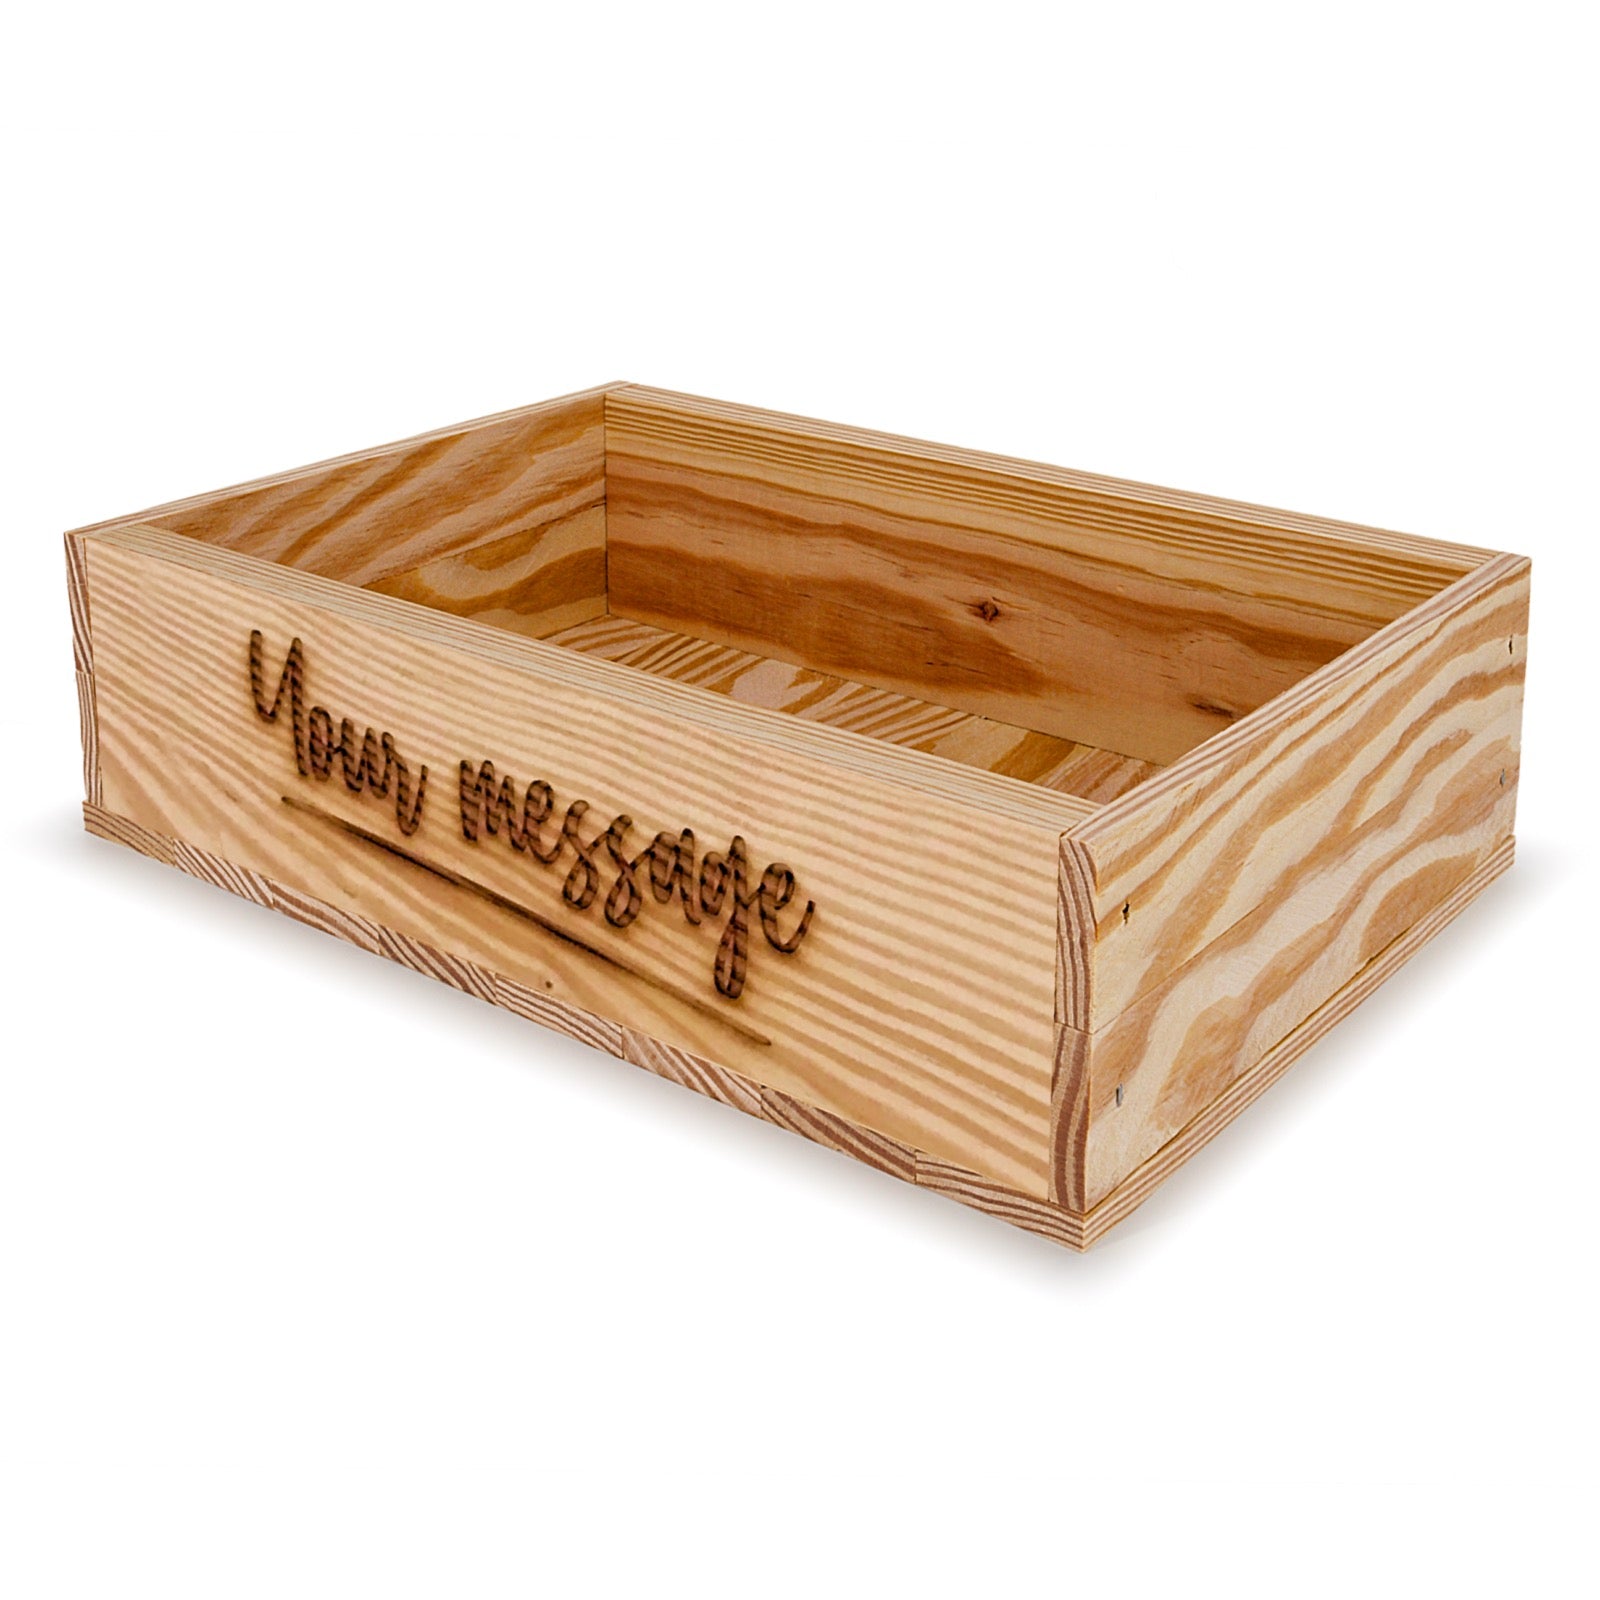 Small wooden crate with custom message 8x13.25x3.5, 6-BX-8-13.25-3.5-ST-NW-NL, 12-BX-8-13.25-3.5-ST-NW-NL, 24-BX-8-13.25-3.5-ST-NW-NL, 48-BX-8-13.25-3.5-ST-NW-NL, 96-BX-8-13.25-3.5-ST-NW-NL